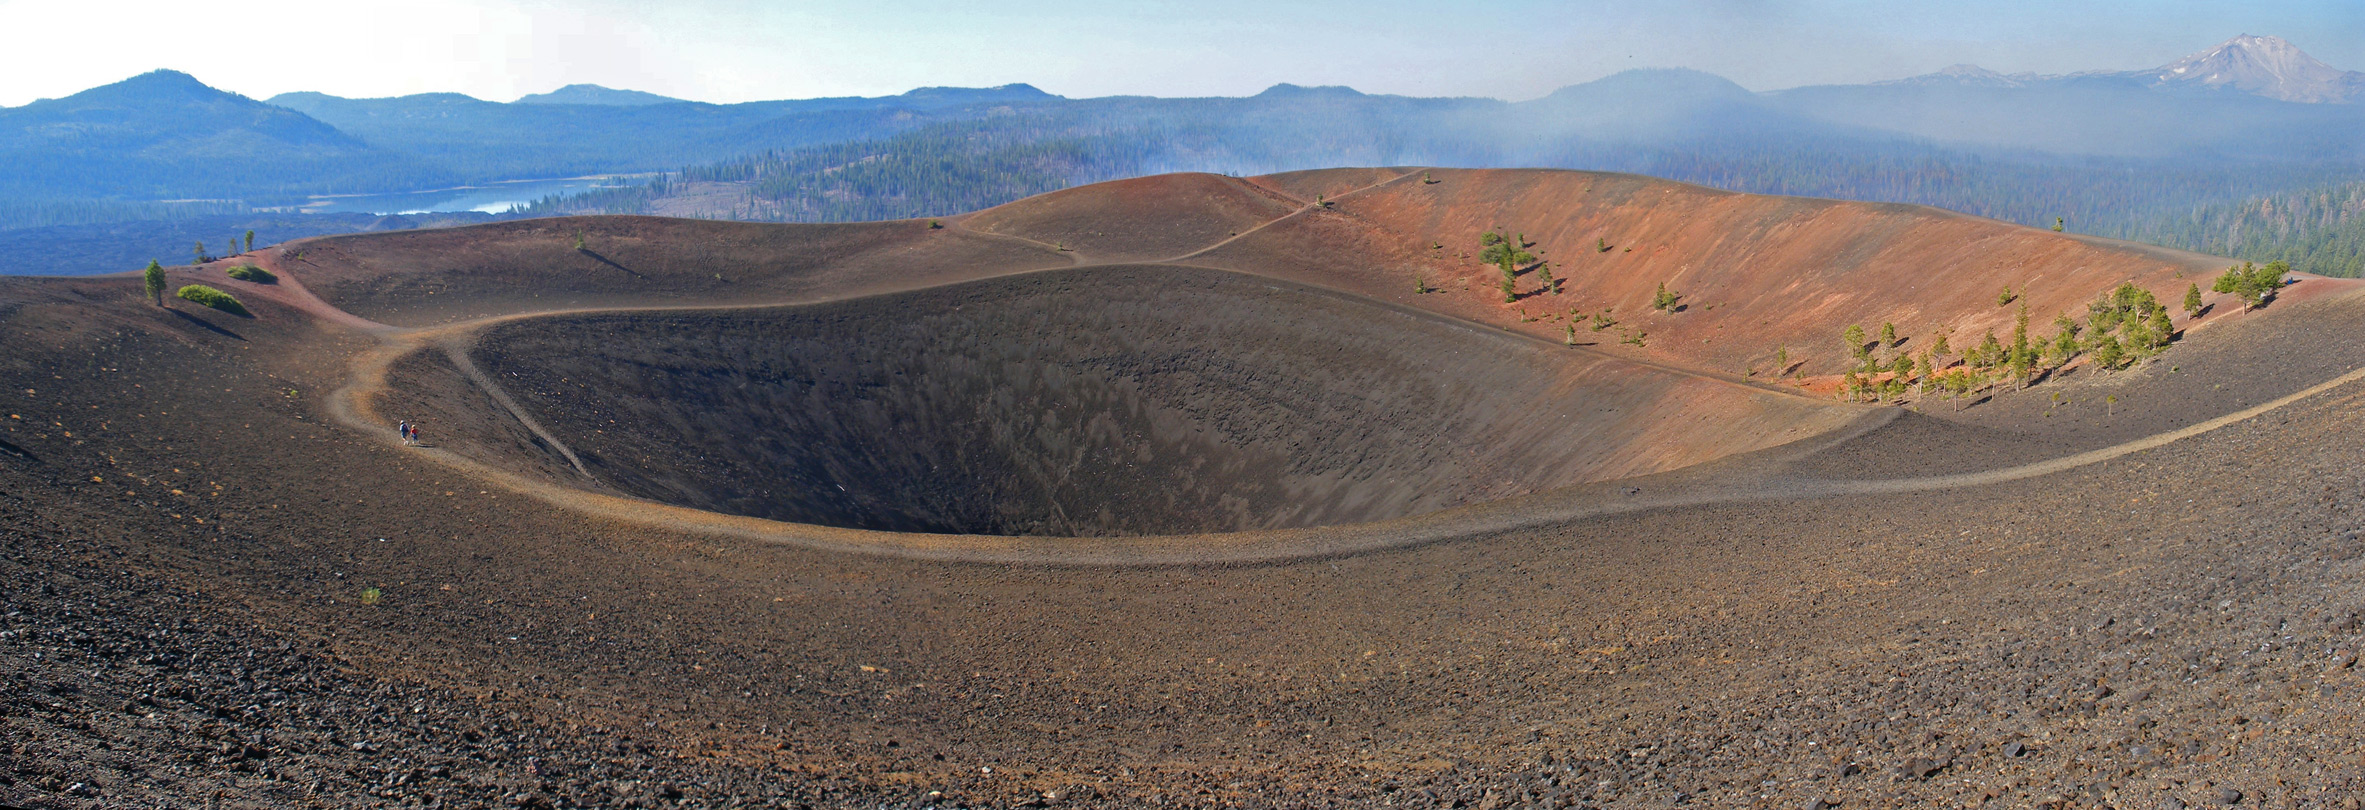 Cinder Cone, from the north rim